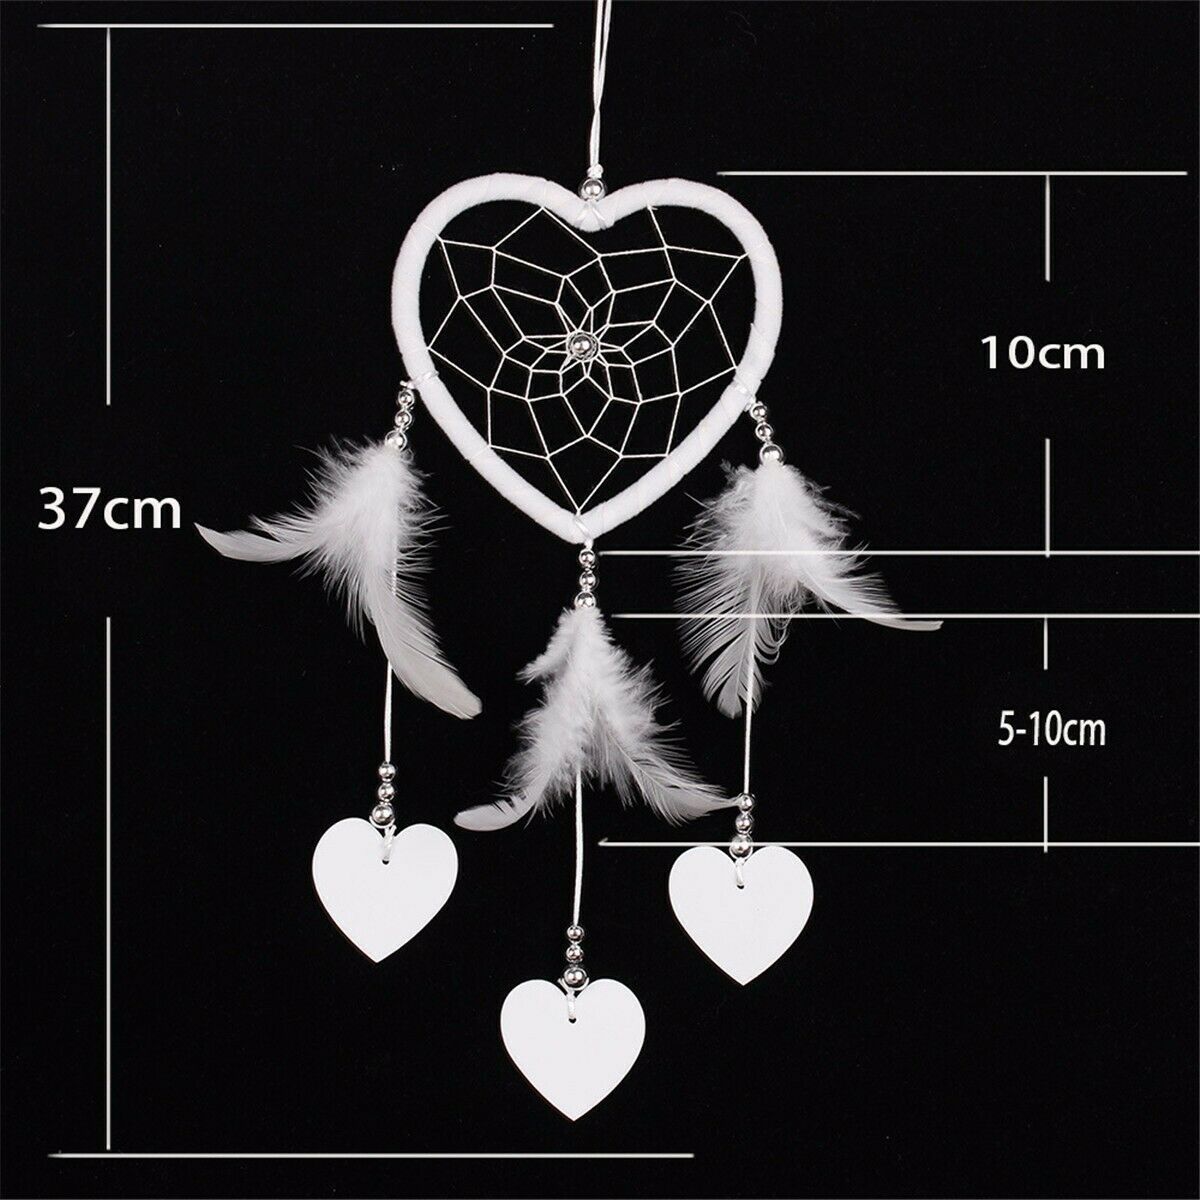 Handmade Heart Dream Catcher With Feather Wall Car Home Hanging Decor Ornament